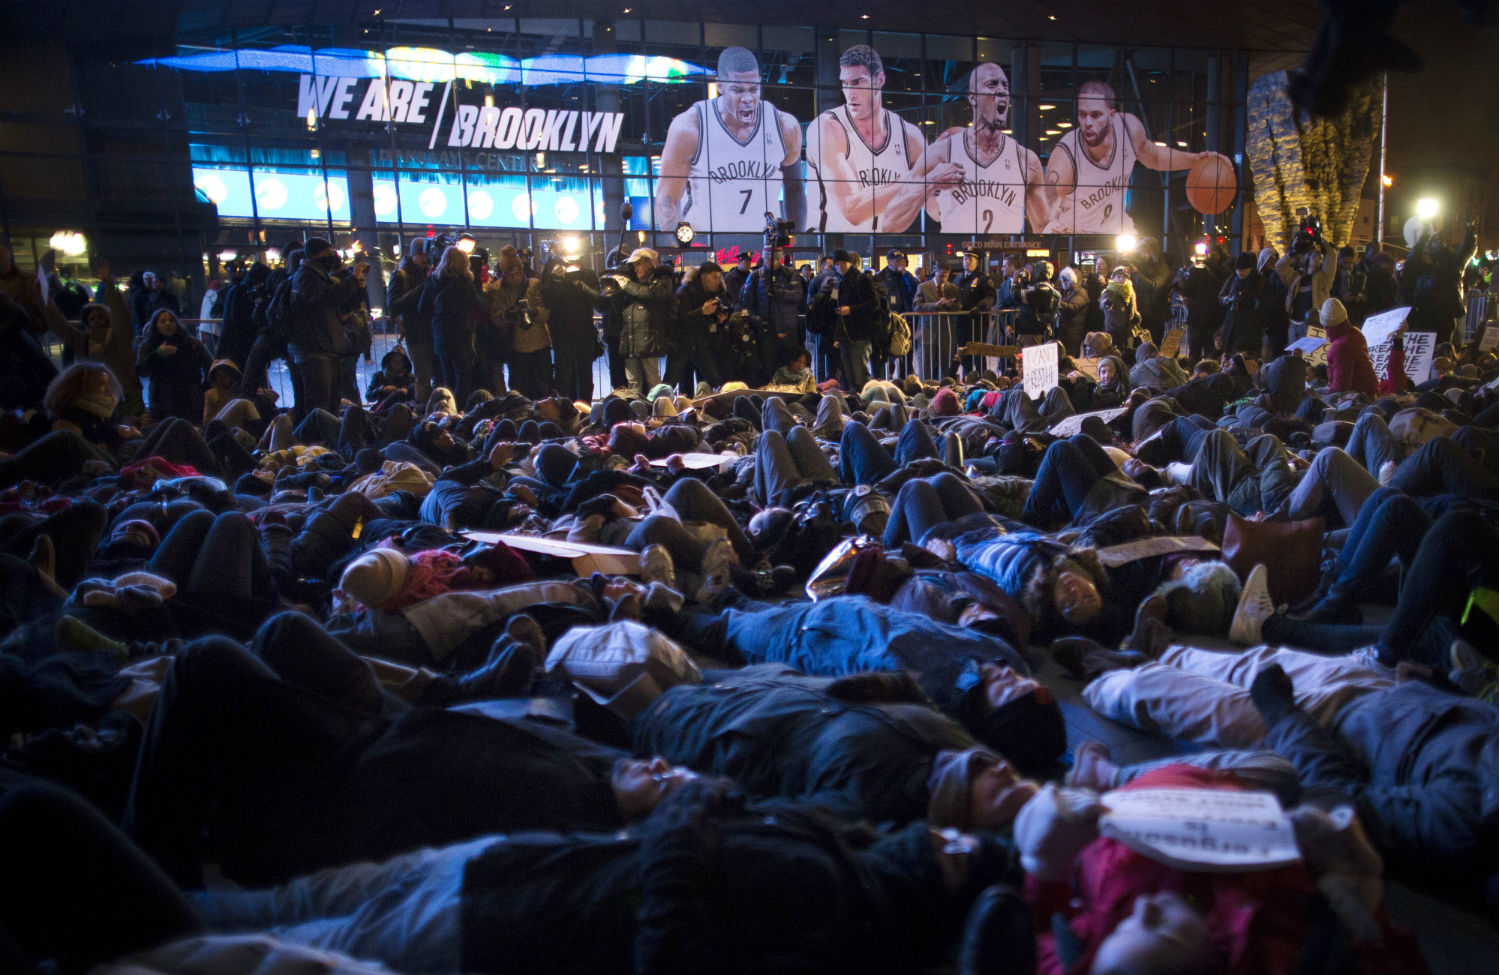 Activists Stage a ‘Royal Shutdown’ of Barclays Center